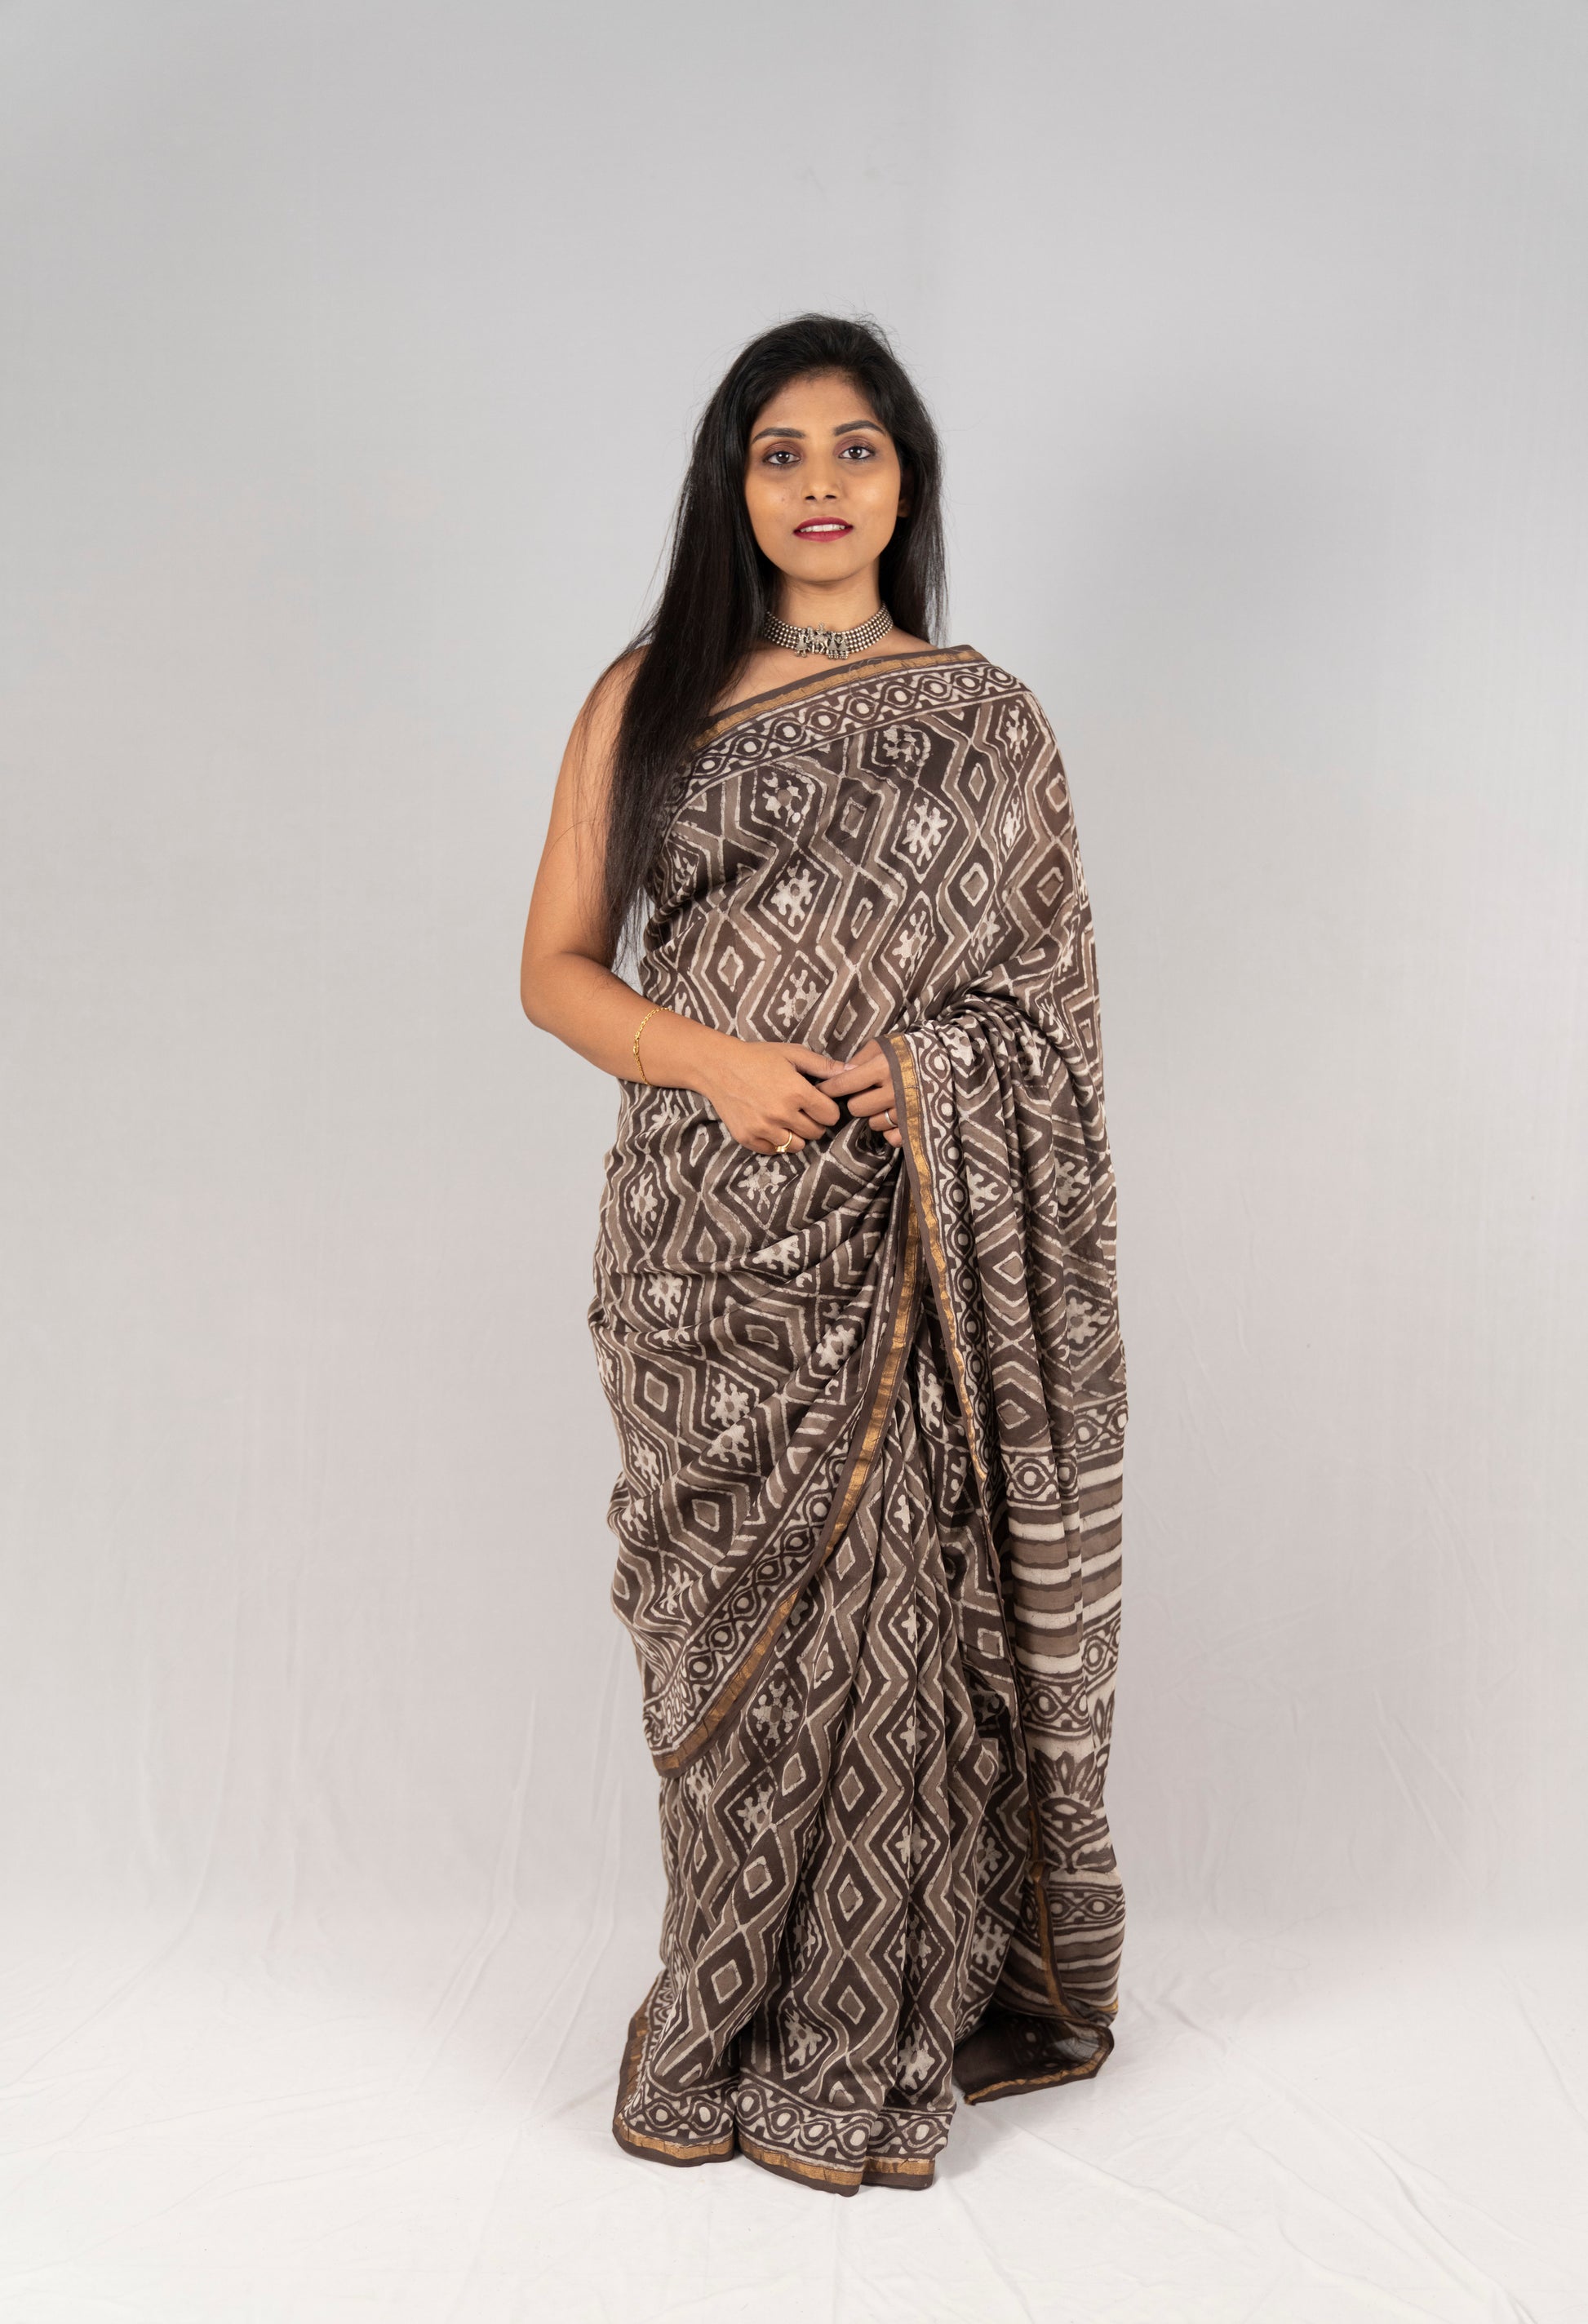 Hand block printed saree from Anemone vinkel, this brown saree and white handloom saree looks beautiful when paired with a contrasting blouse.